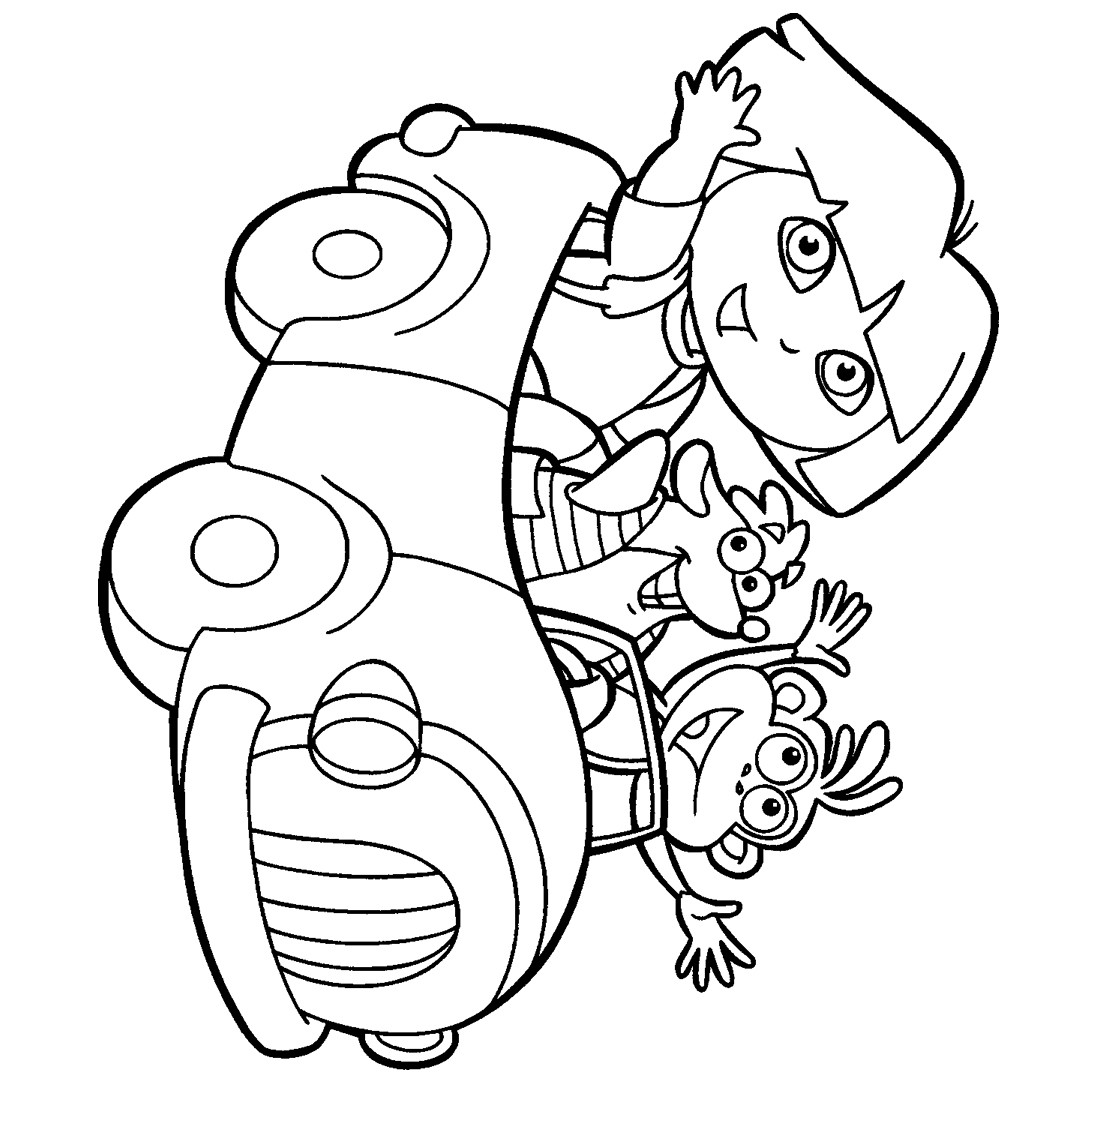 Kids Coloring Pictures
 Printable coloring pages for kids